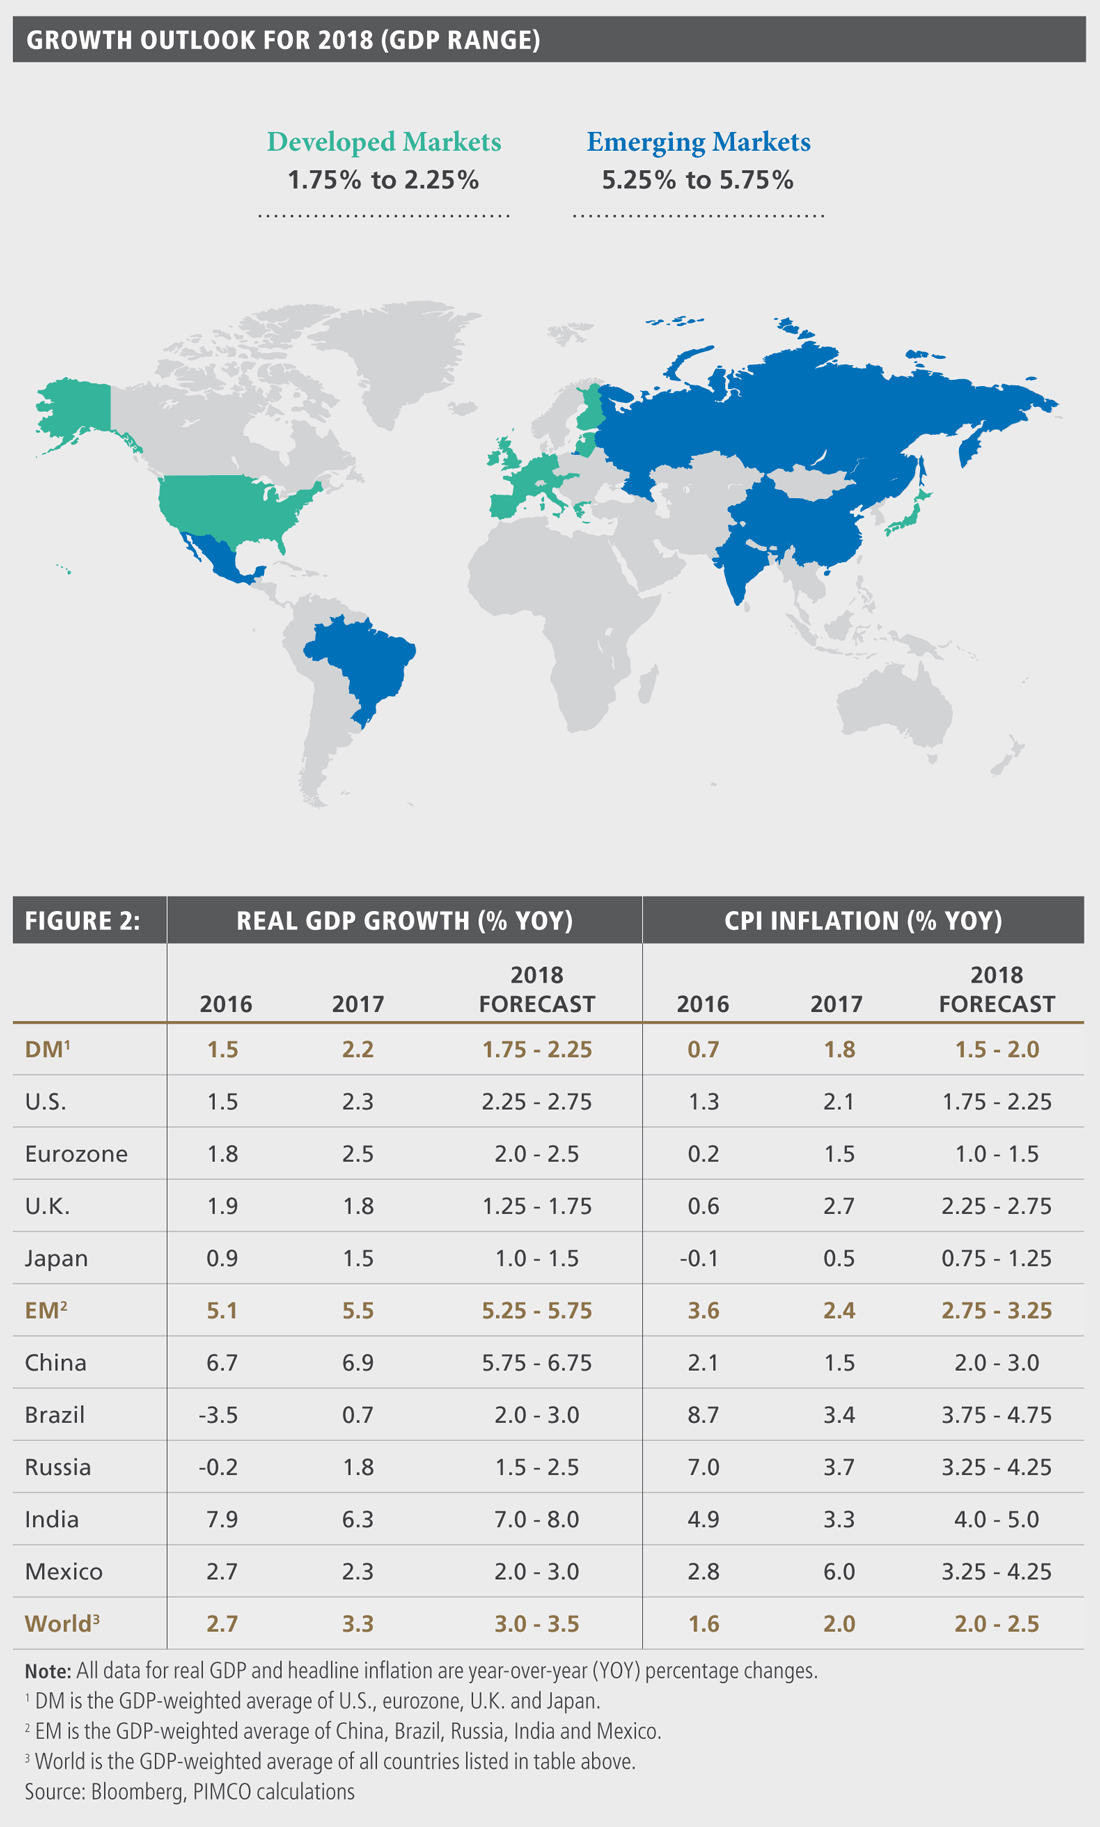 The figure is a world map showing the outlook for real GDP growth for selected countries worldwide in 2018. Forecasted growth for emerging markets ranges between 5.25% and 5.75%, while those of developed markets range from 1.75% to 2.25%. Country data of real GDP growth and CPI inflation is detailed in a table below the chart.